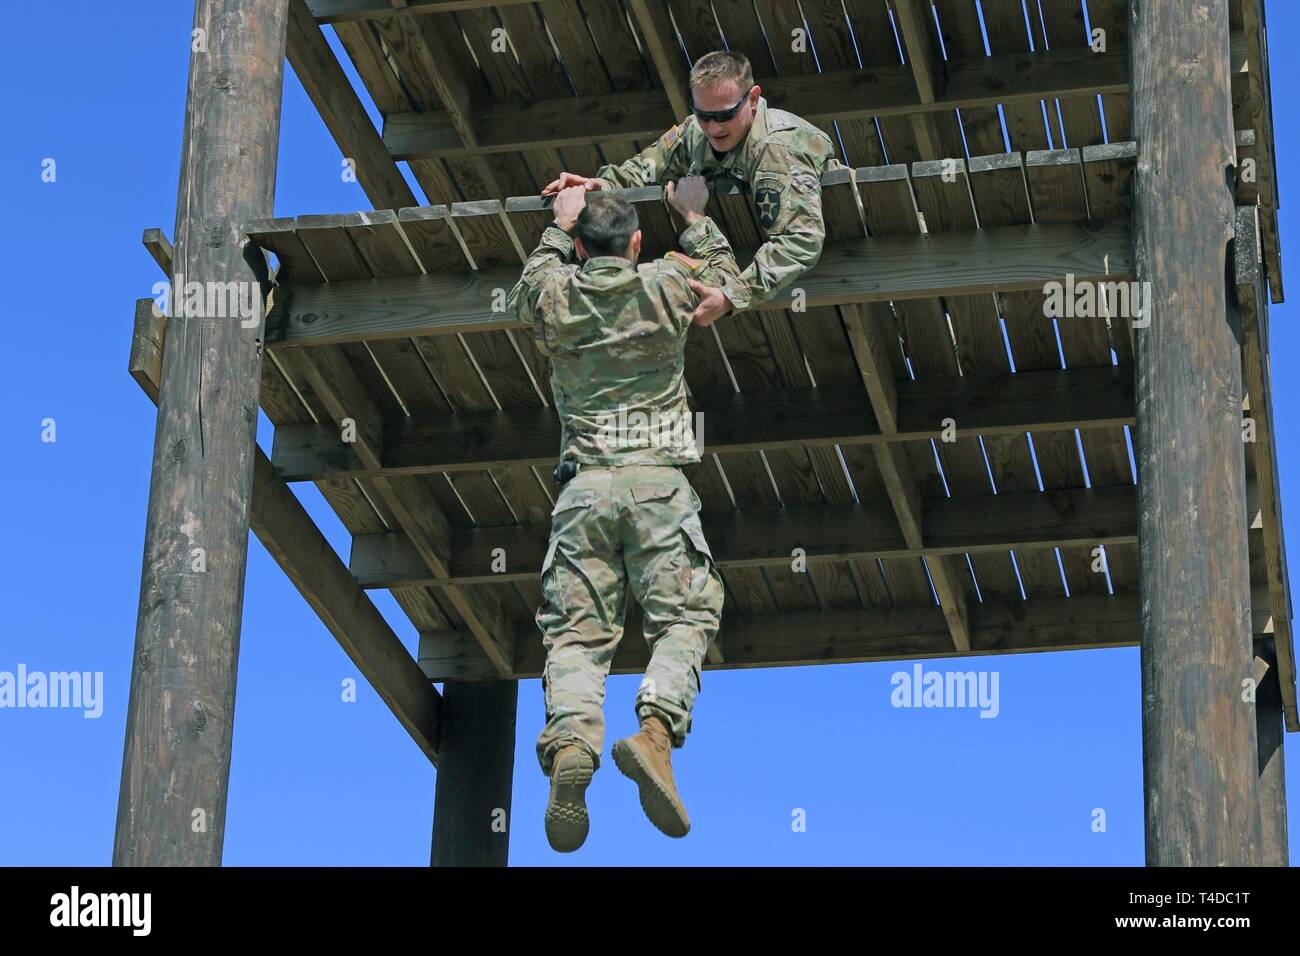 CAMP HUMPHREYS, Republic of Korea - Capt. Colby S. Miller, Phenix City, Alabama native, infantry officer, 2nd Infantry Division/ROK-U.S. Combined Division, and Capt. Jonathan J. Kaminski, Atlanta, Georgia native, field artillery officer, 2nd Combat Aviation Brigade, negotiate an obstacle course, March 22, in preparation for the 2019 Best Ranger Competition taking place at Fort Benning, Georgia. Miller and Kaminski will compete against more than 50 other Ranger teams, April 12-14. Stock Photo